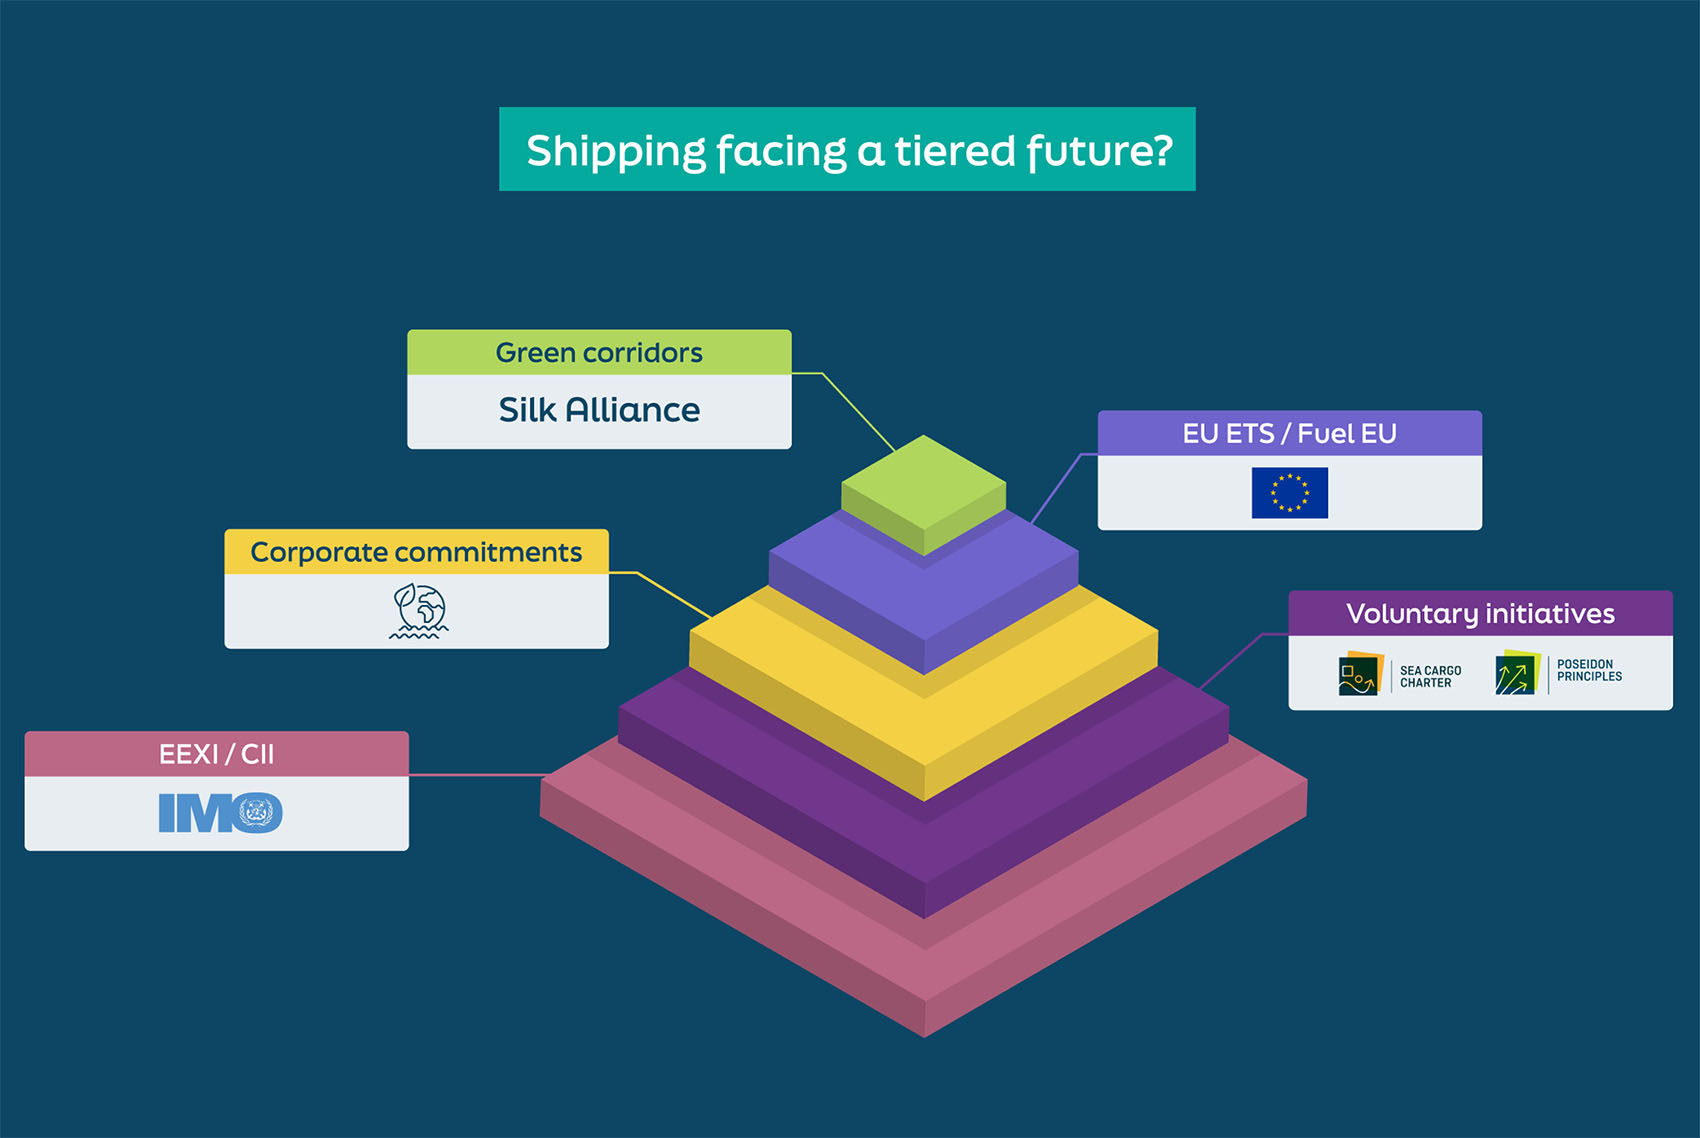 Image showing a pyramid with the following layers, starting from the bottom: EEXI/CII - IMO, Voluntary initiatives: Sea Cargo Charter / Poseidon Principles, Corporate commitments, EU ETS / Fuel EU, Green corridors: Silk alliance.  The title asks if shipping is facing a tiered future